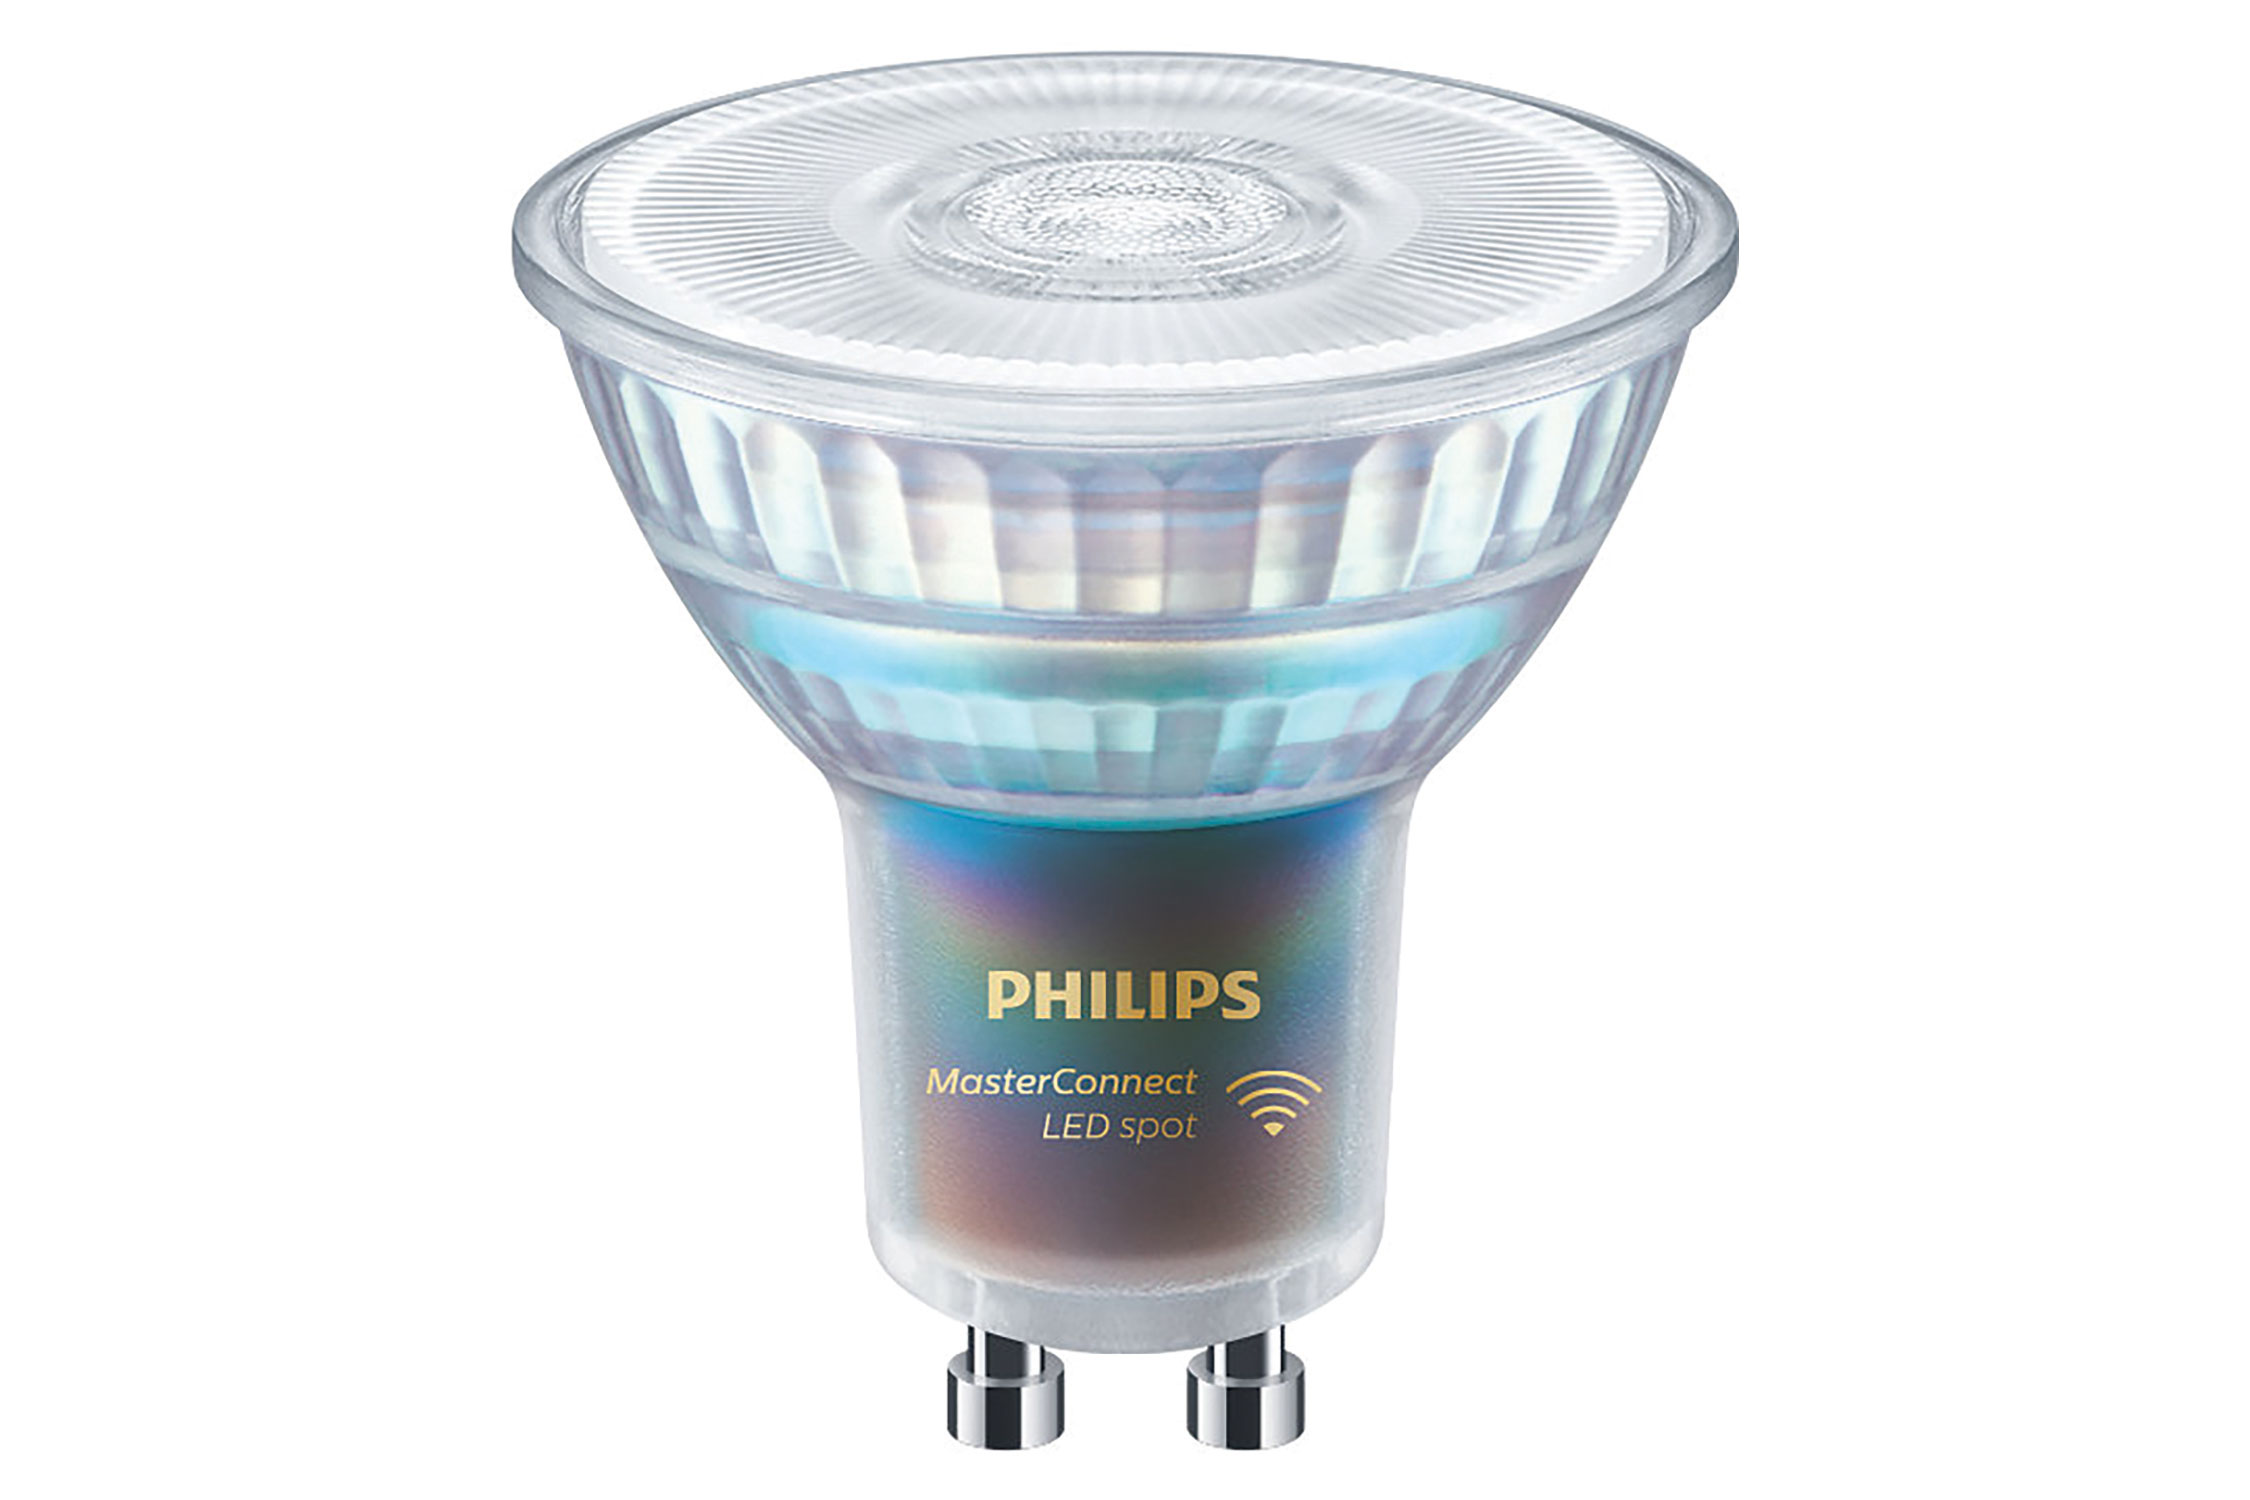 Blue iridescent LED light with a wifi signal and reading Philips MasterConnect LED spot. Image by Philips.